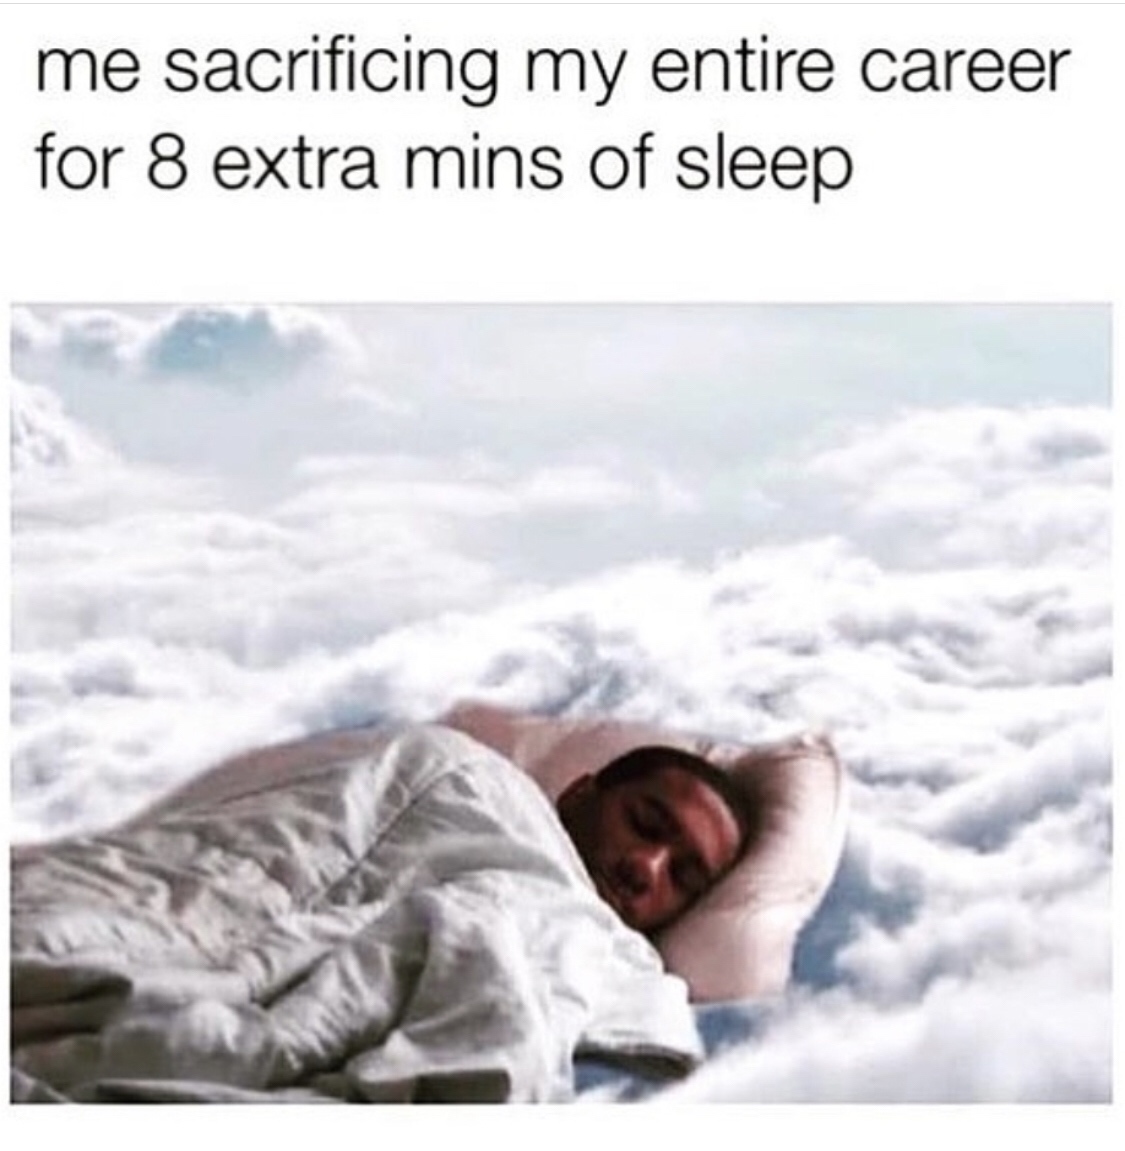 me sacrificing my entire career - me sacrificing my entire career for 8 extra mins of sleep